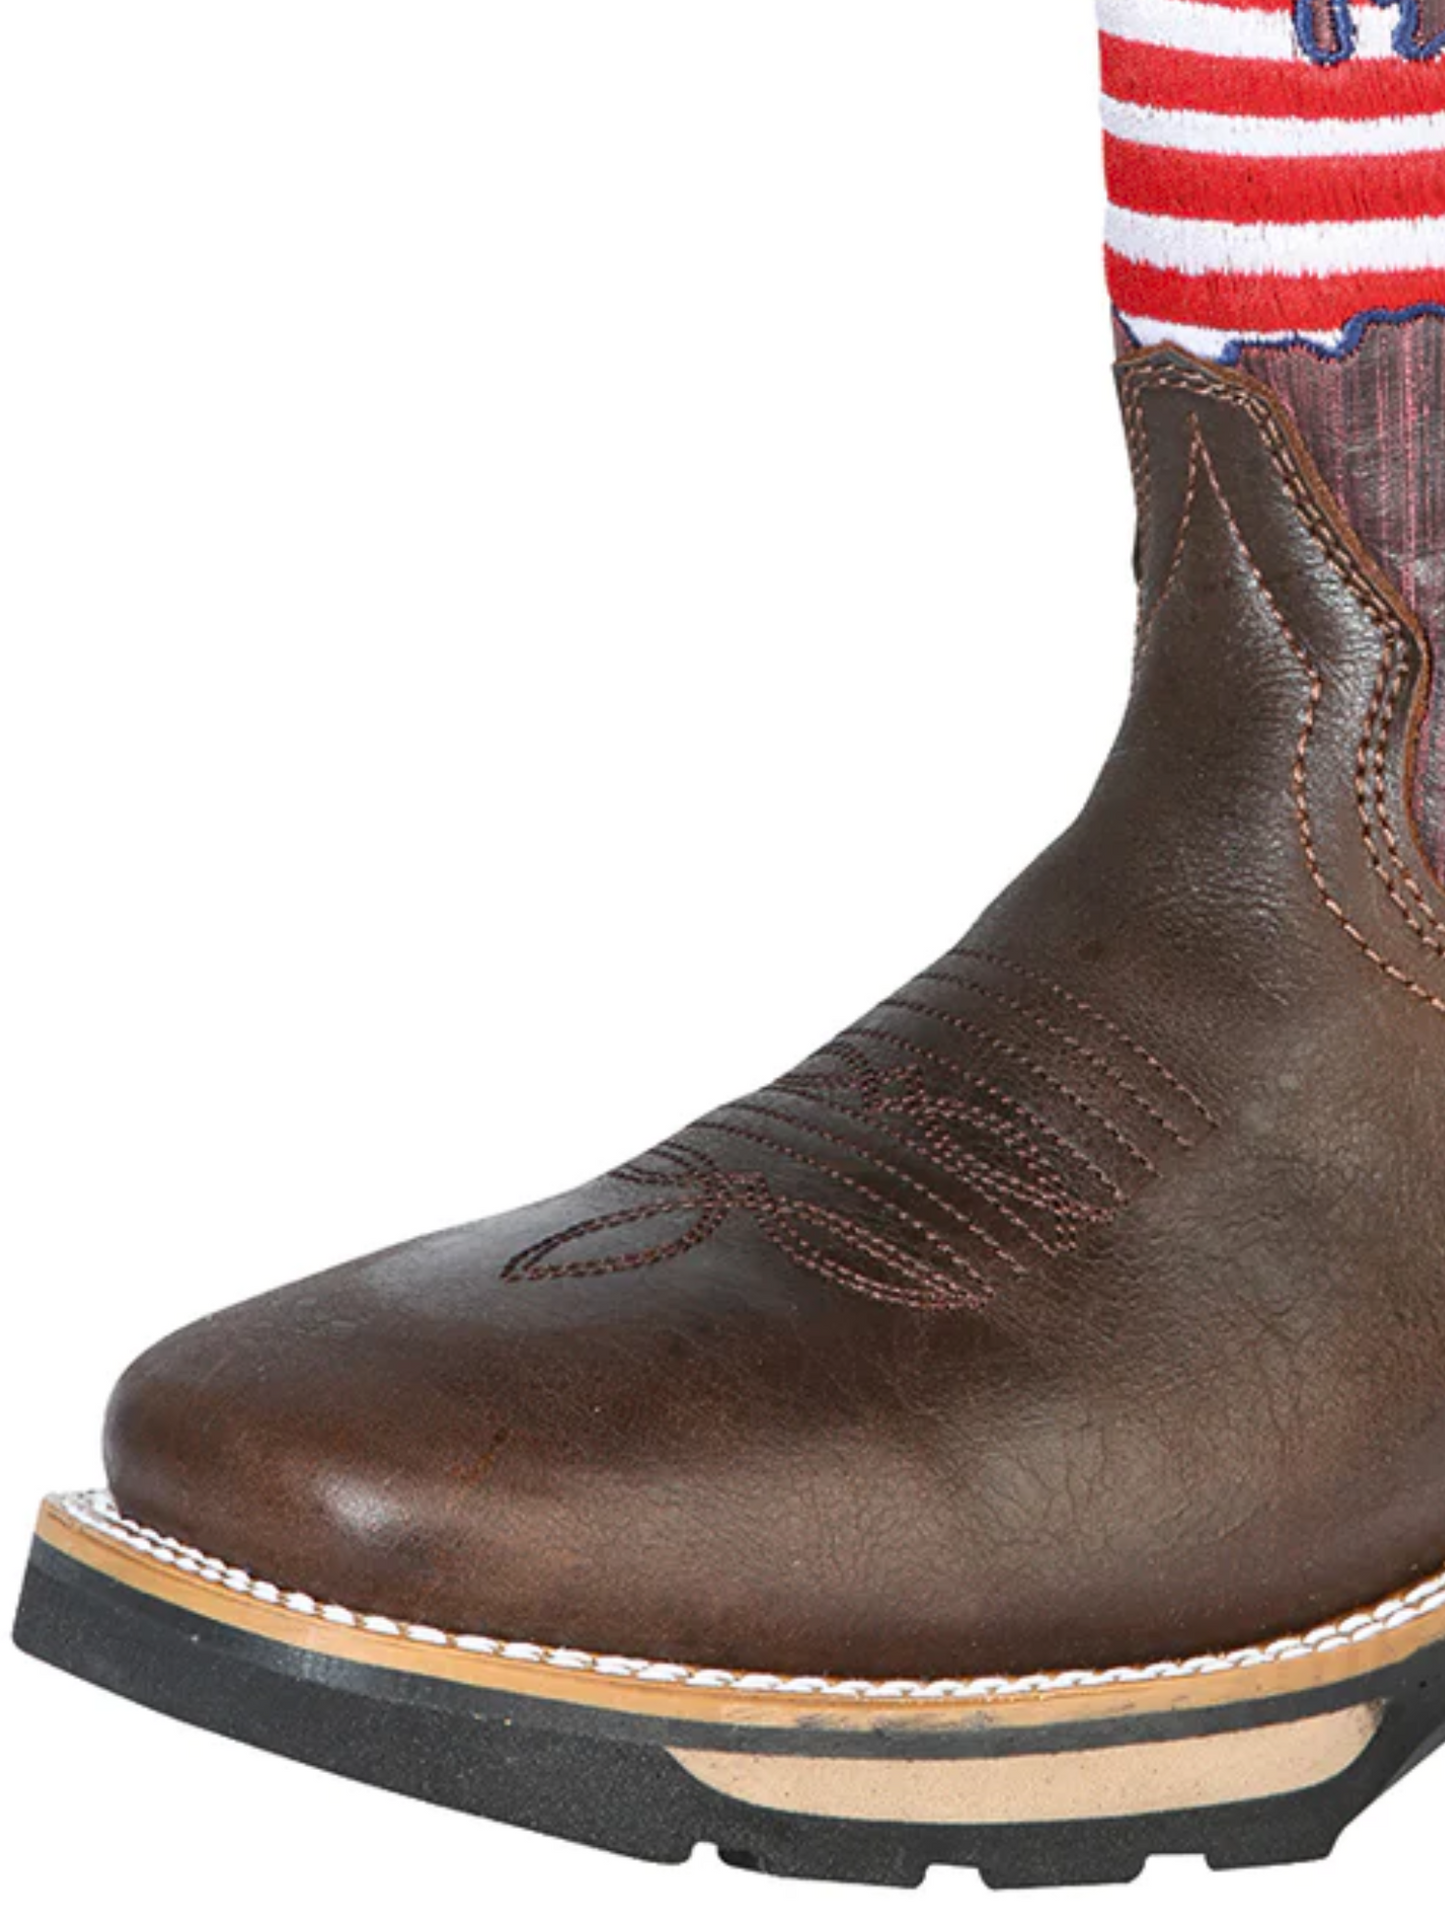 USA Flag Pull-On Tube Rodeo Work Boots with Genuine Leather Soft Toe for Men 'El General' - ID: 126466 Work Boots El General